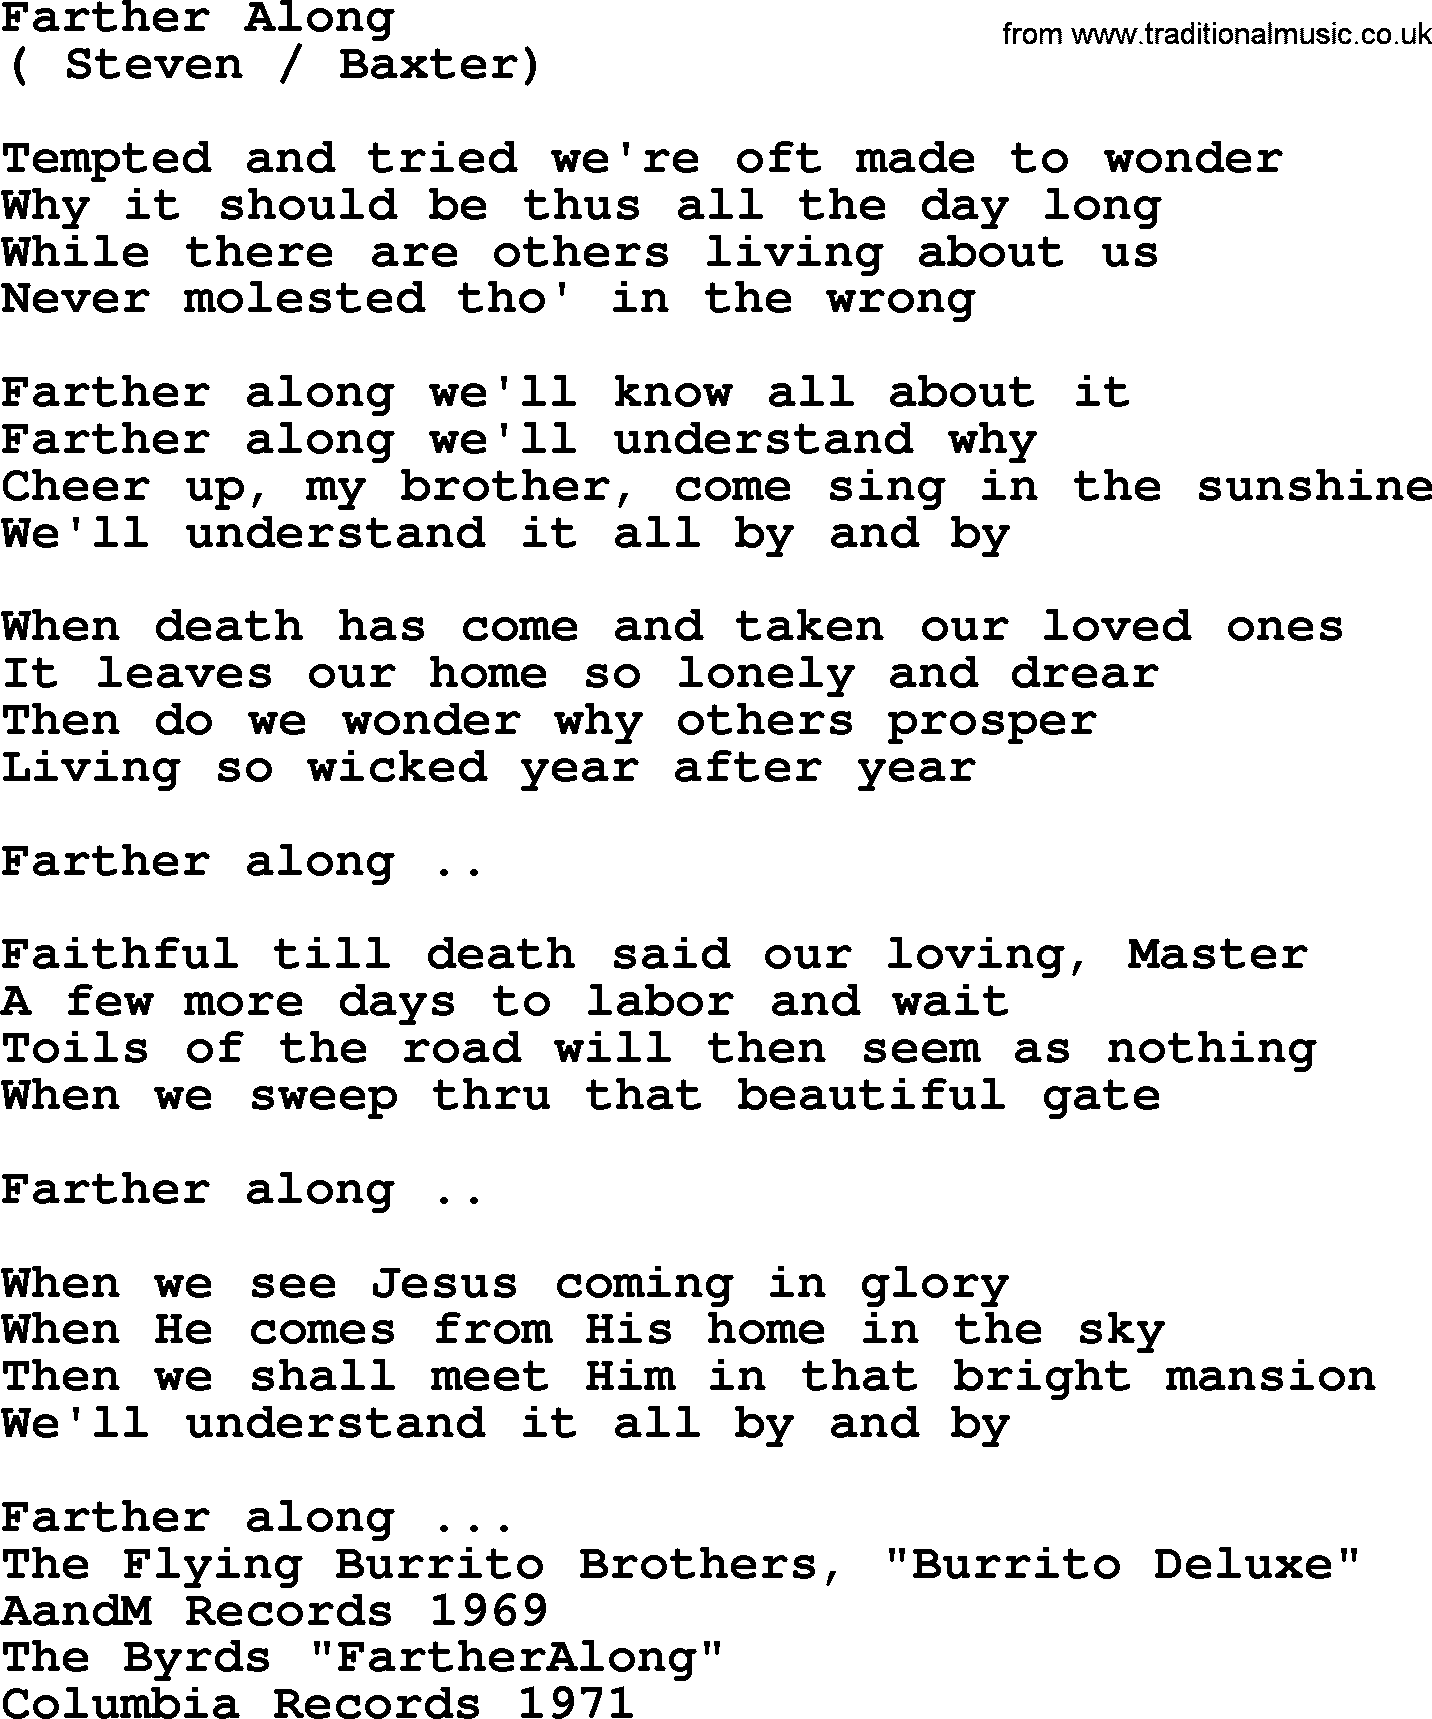 The Byrds song Farther Along, lyrics